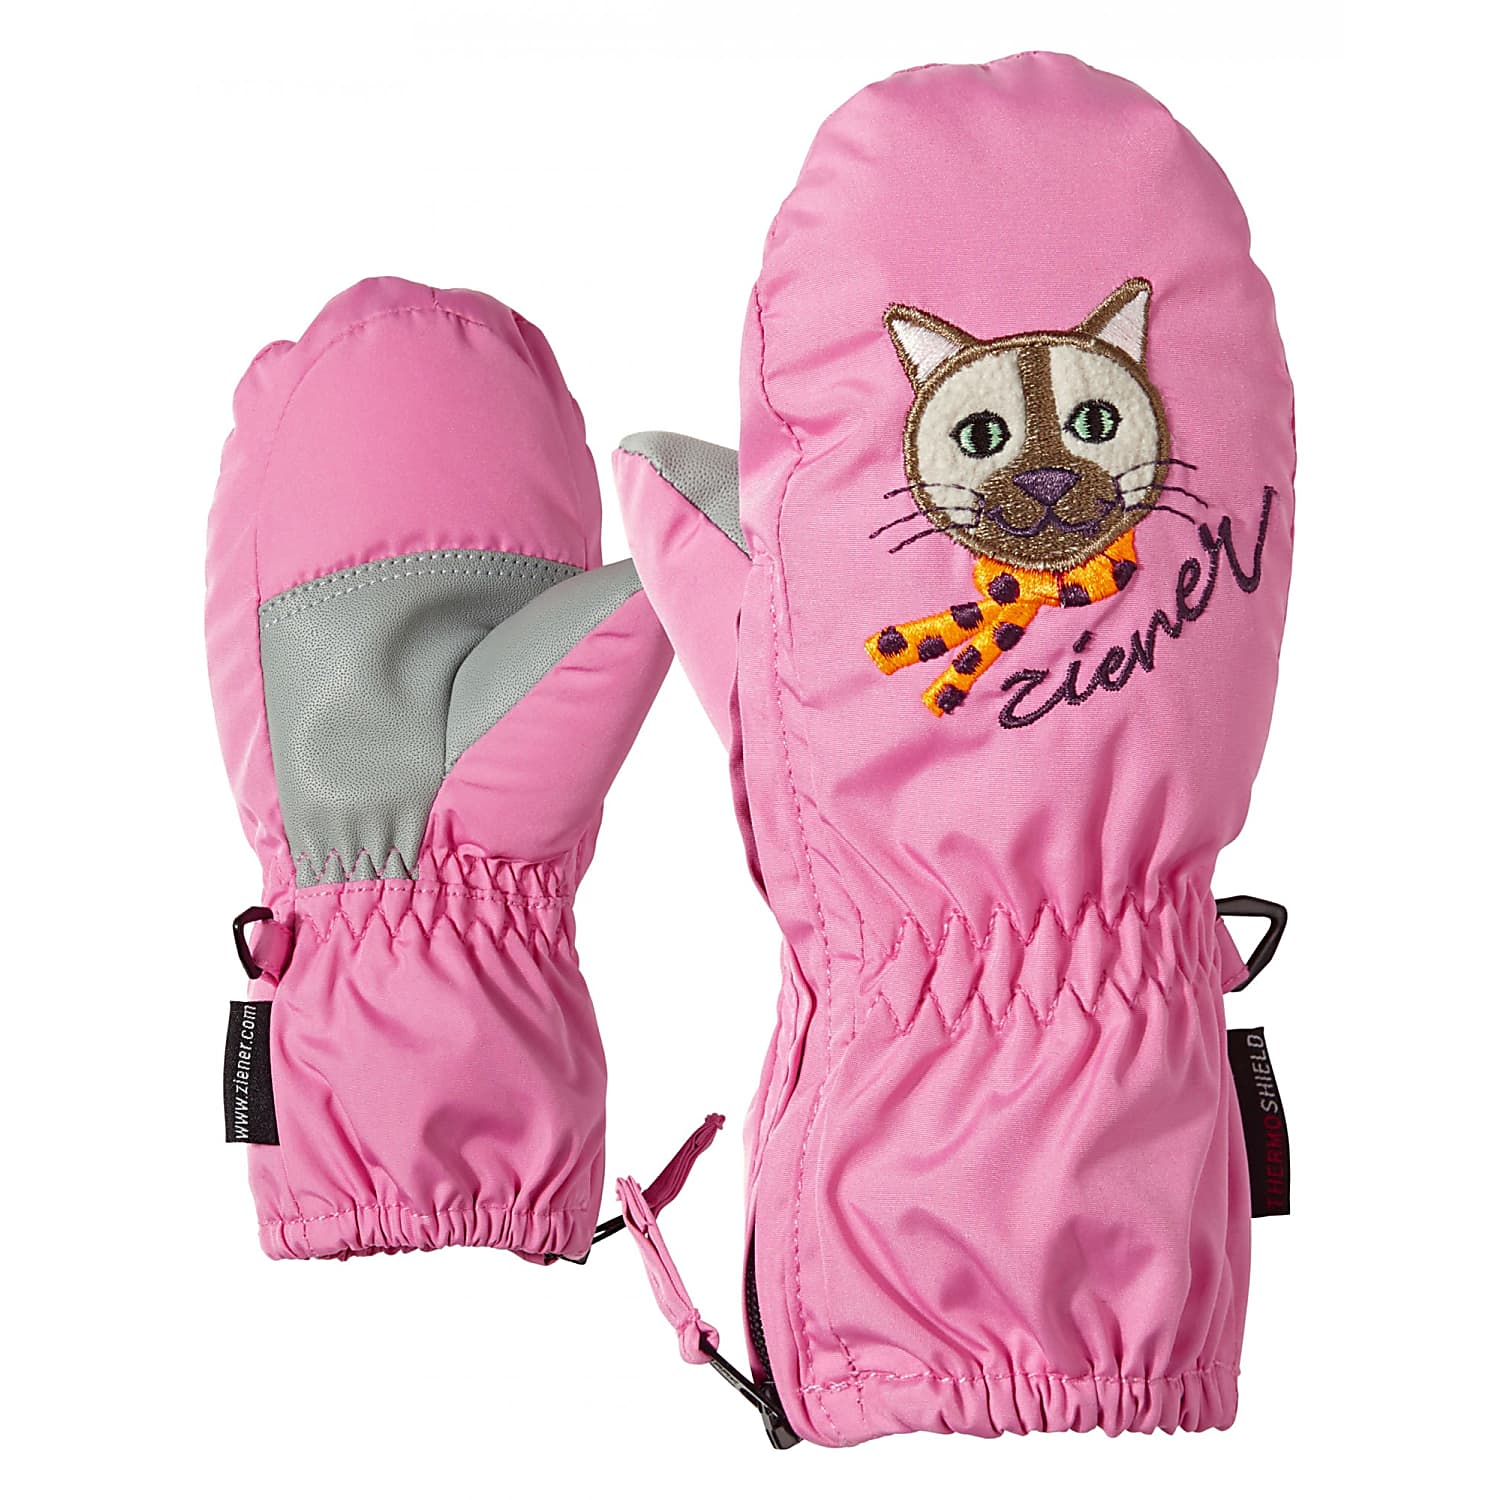 - Pink MINIS cheap and shipping Flamingo MITTEN, TODDLER ZOO LE Ziener Fast